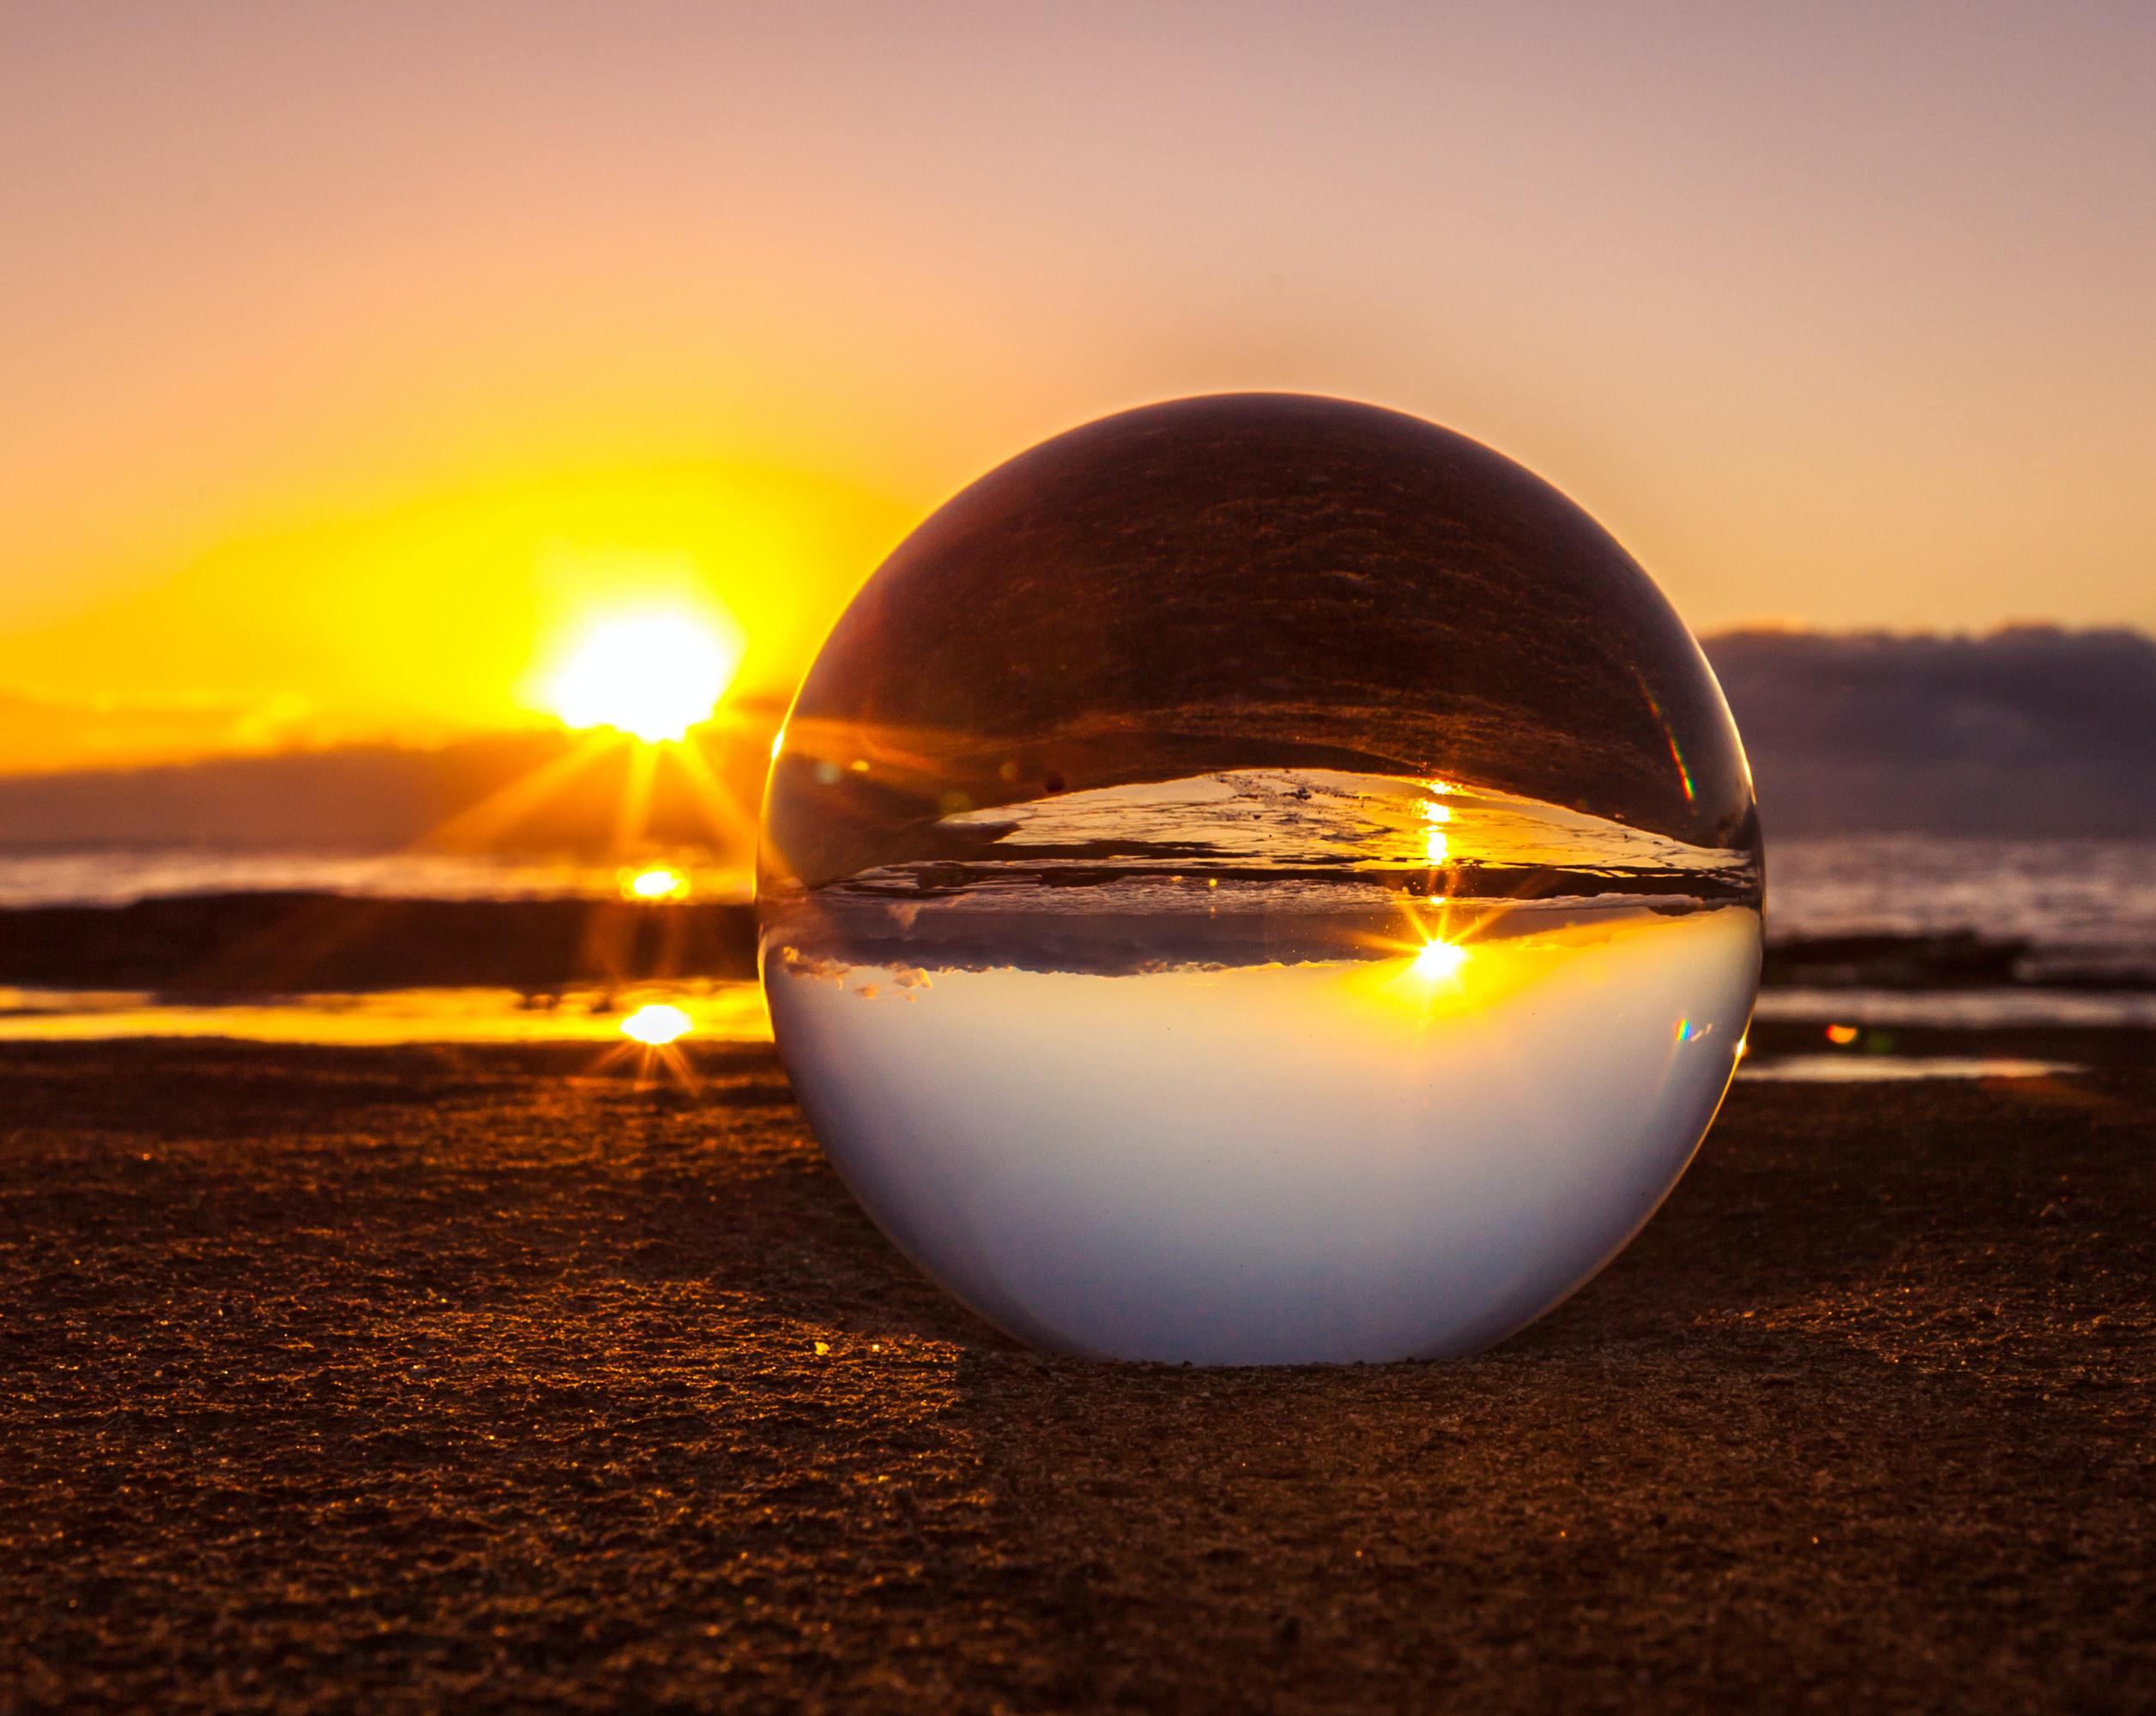 Photograph of a sunset and a glass ball on sand, showing the inverted sunset